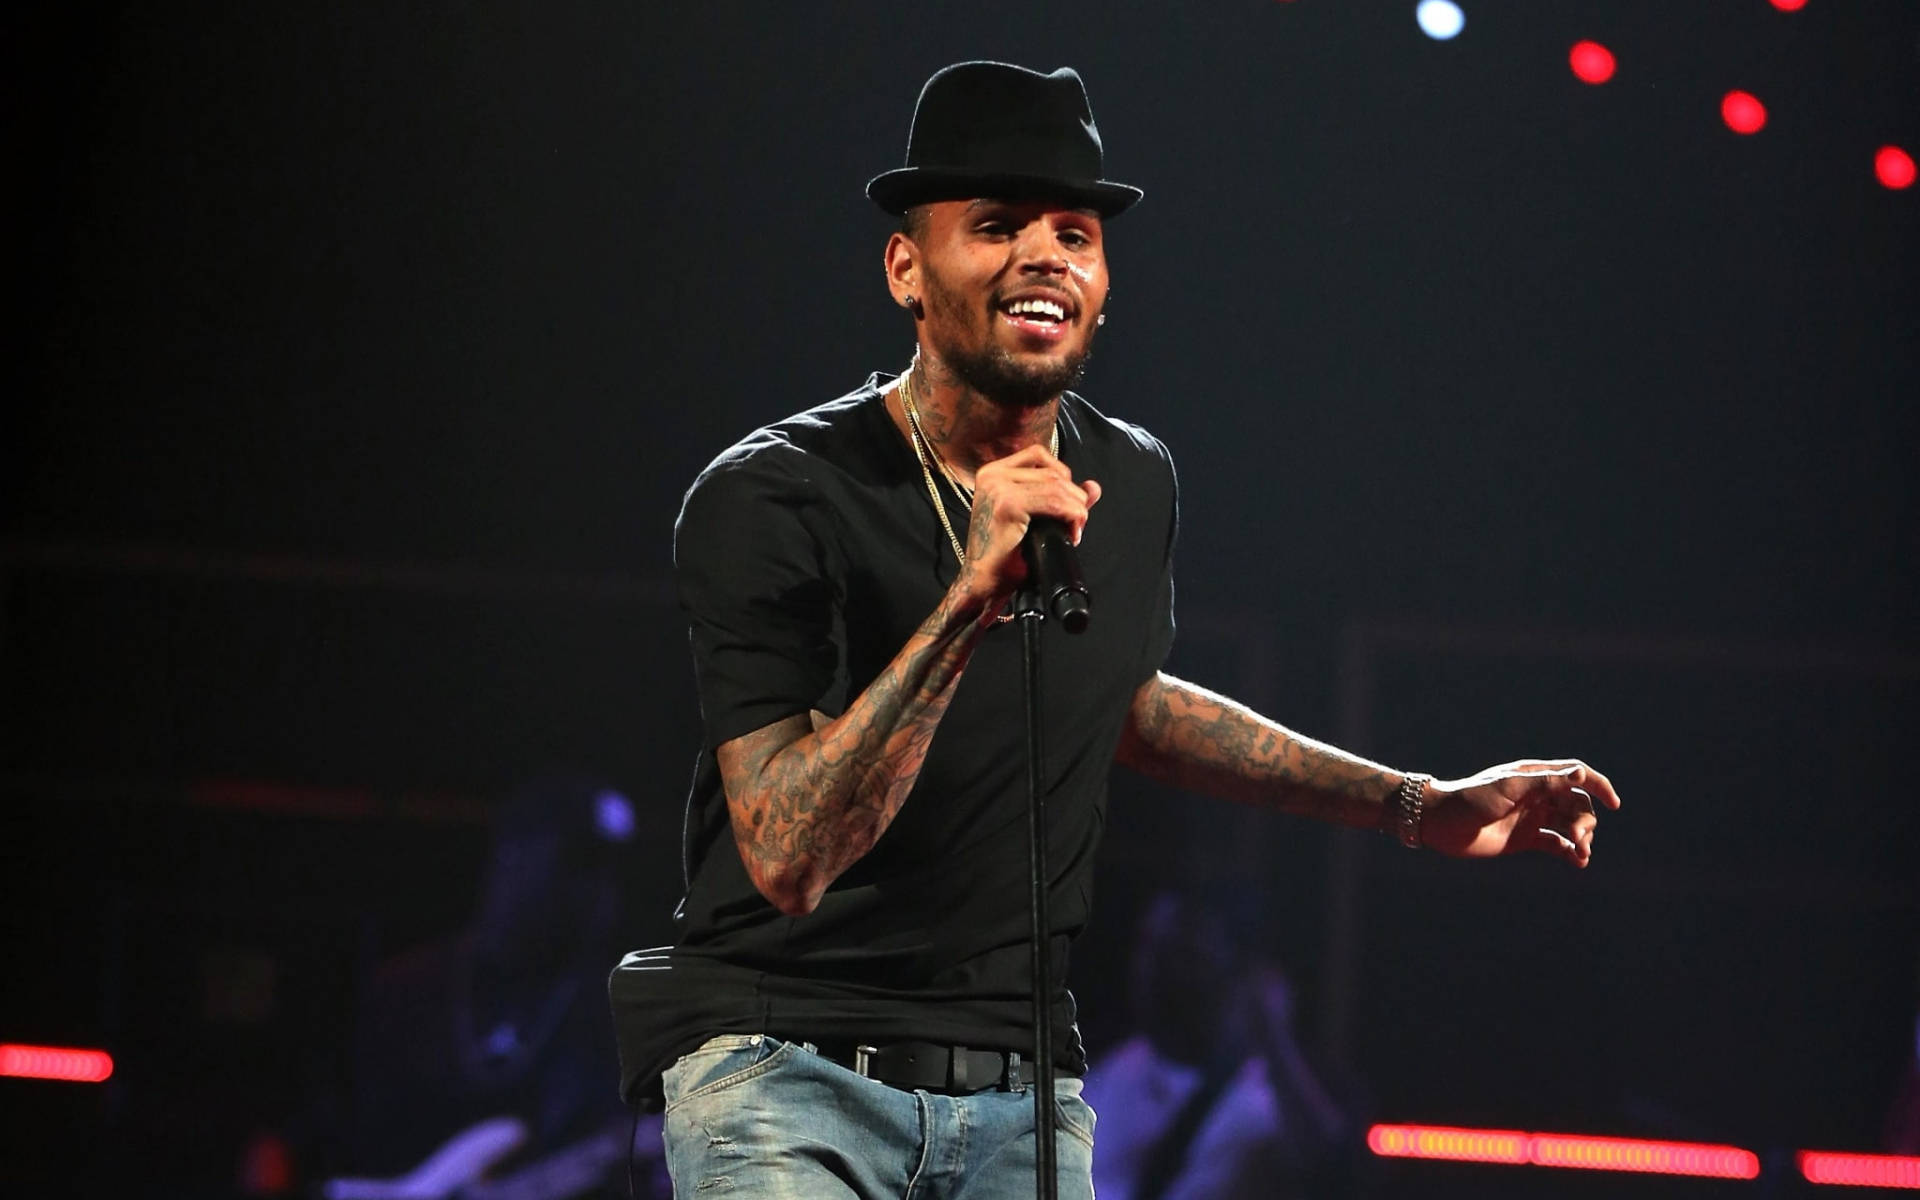 Chris Brown On Stage Wallpaper